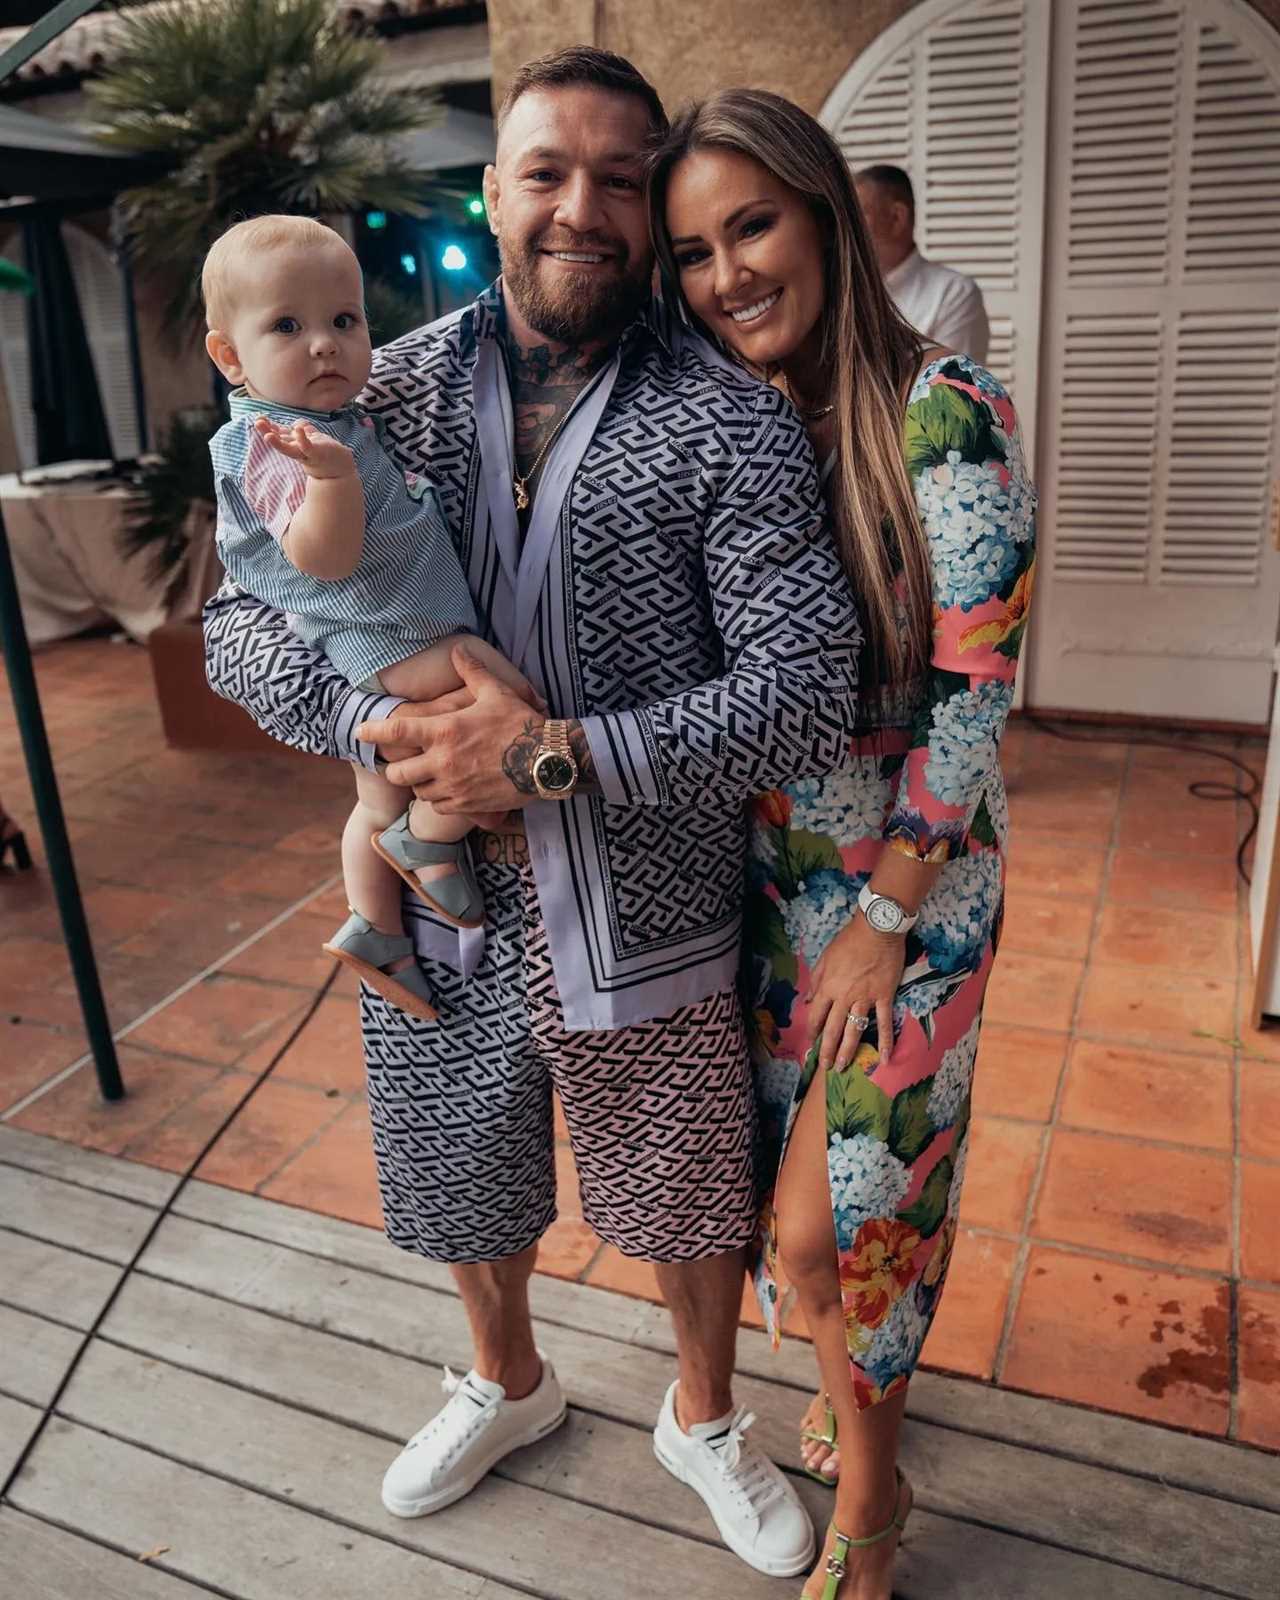 Conor McGregor and Dee Devlin host an adorable joint birthday party for their sons Conor Jr., 5 and Rian, 1 year old.